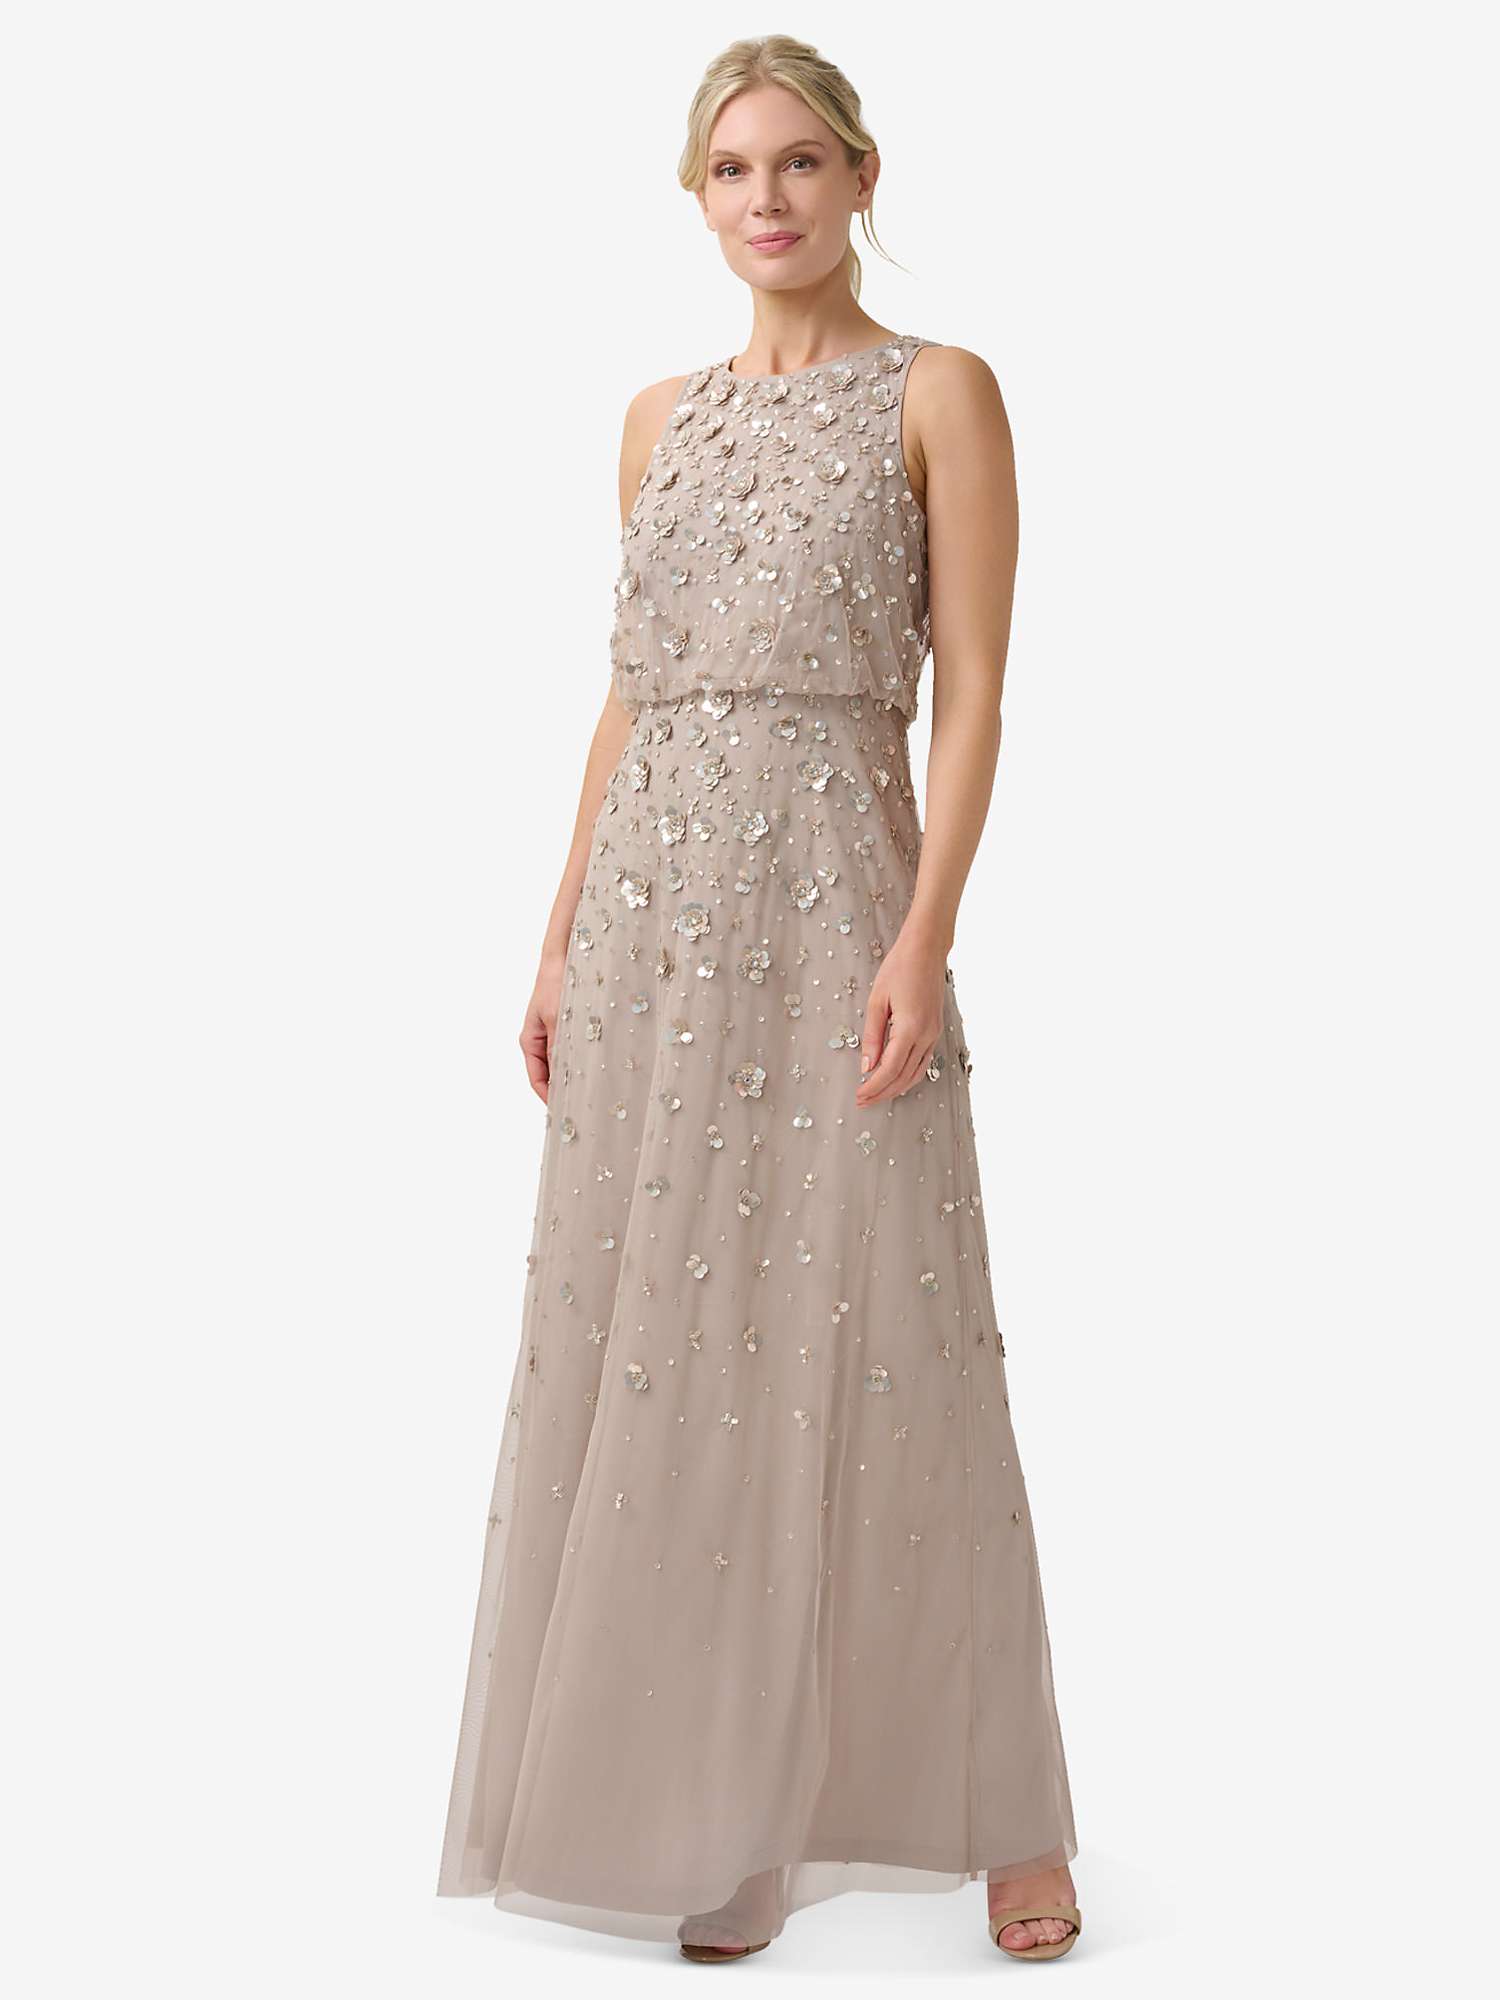 Buy Adrianna Papell Halter Blouson Embellished Gown, Marble Online at johnlewis.com